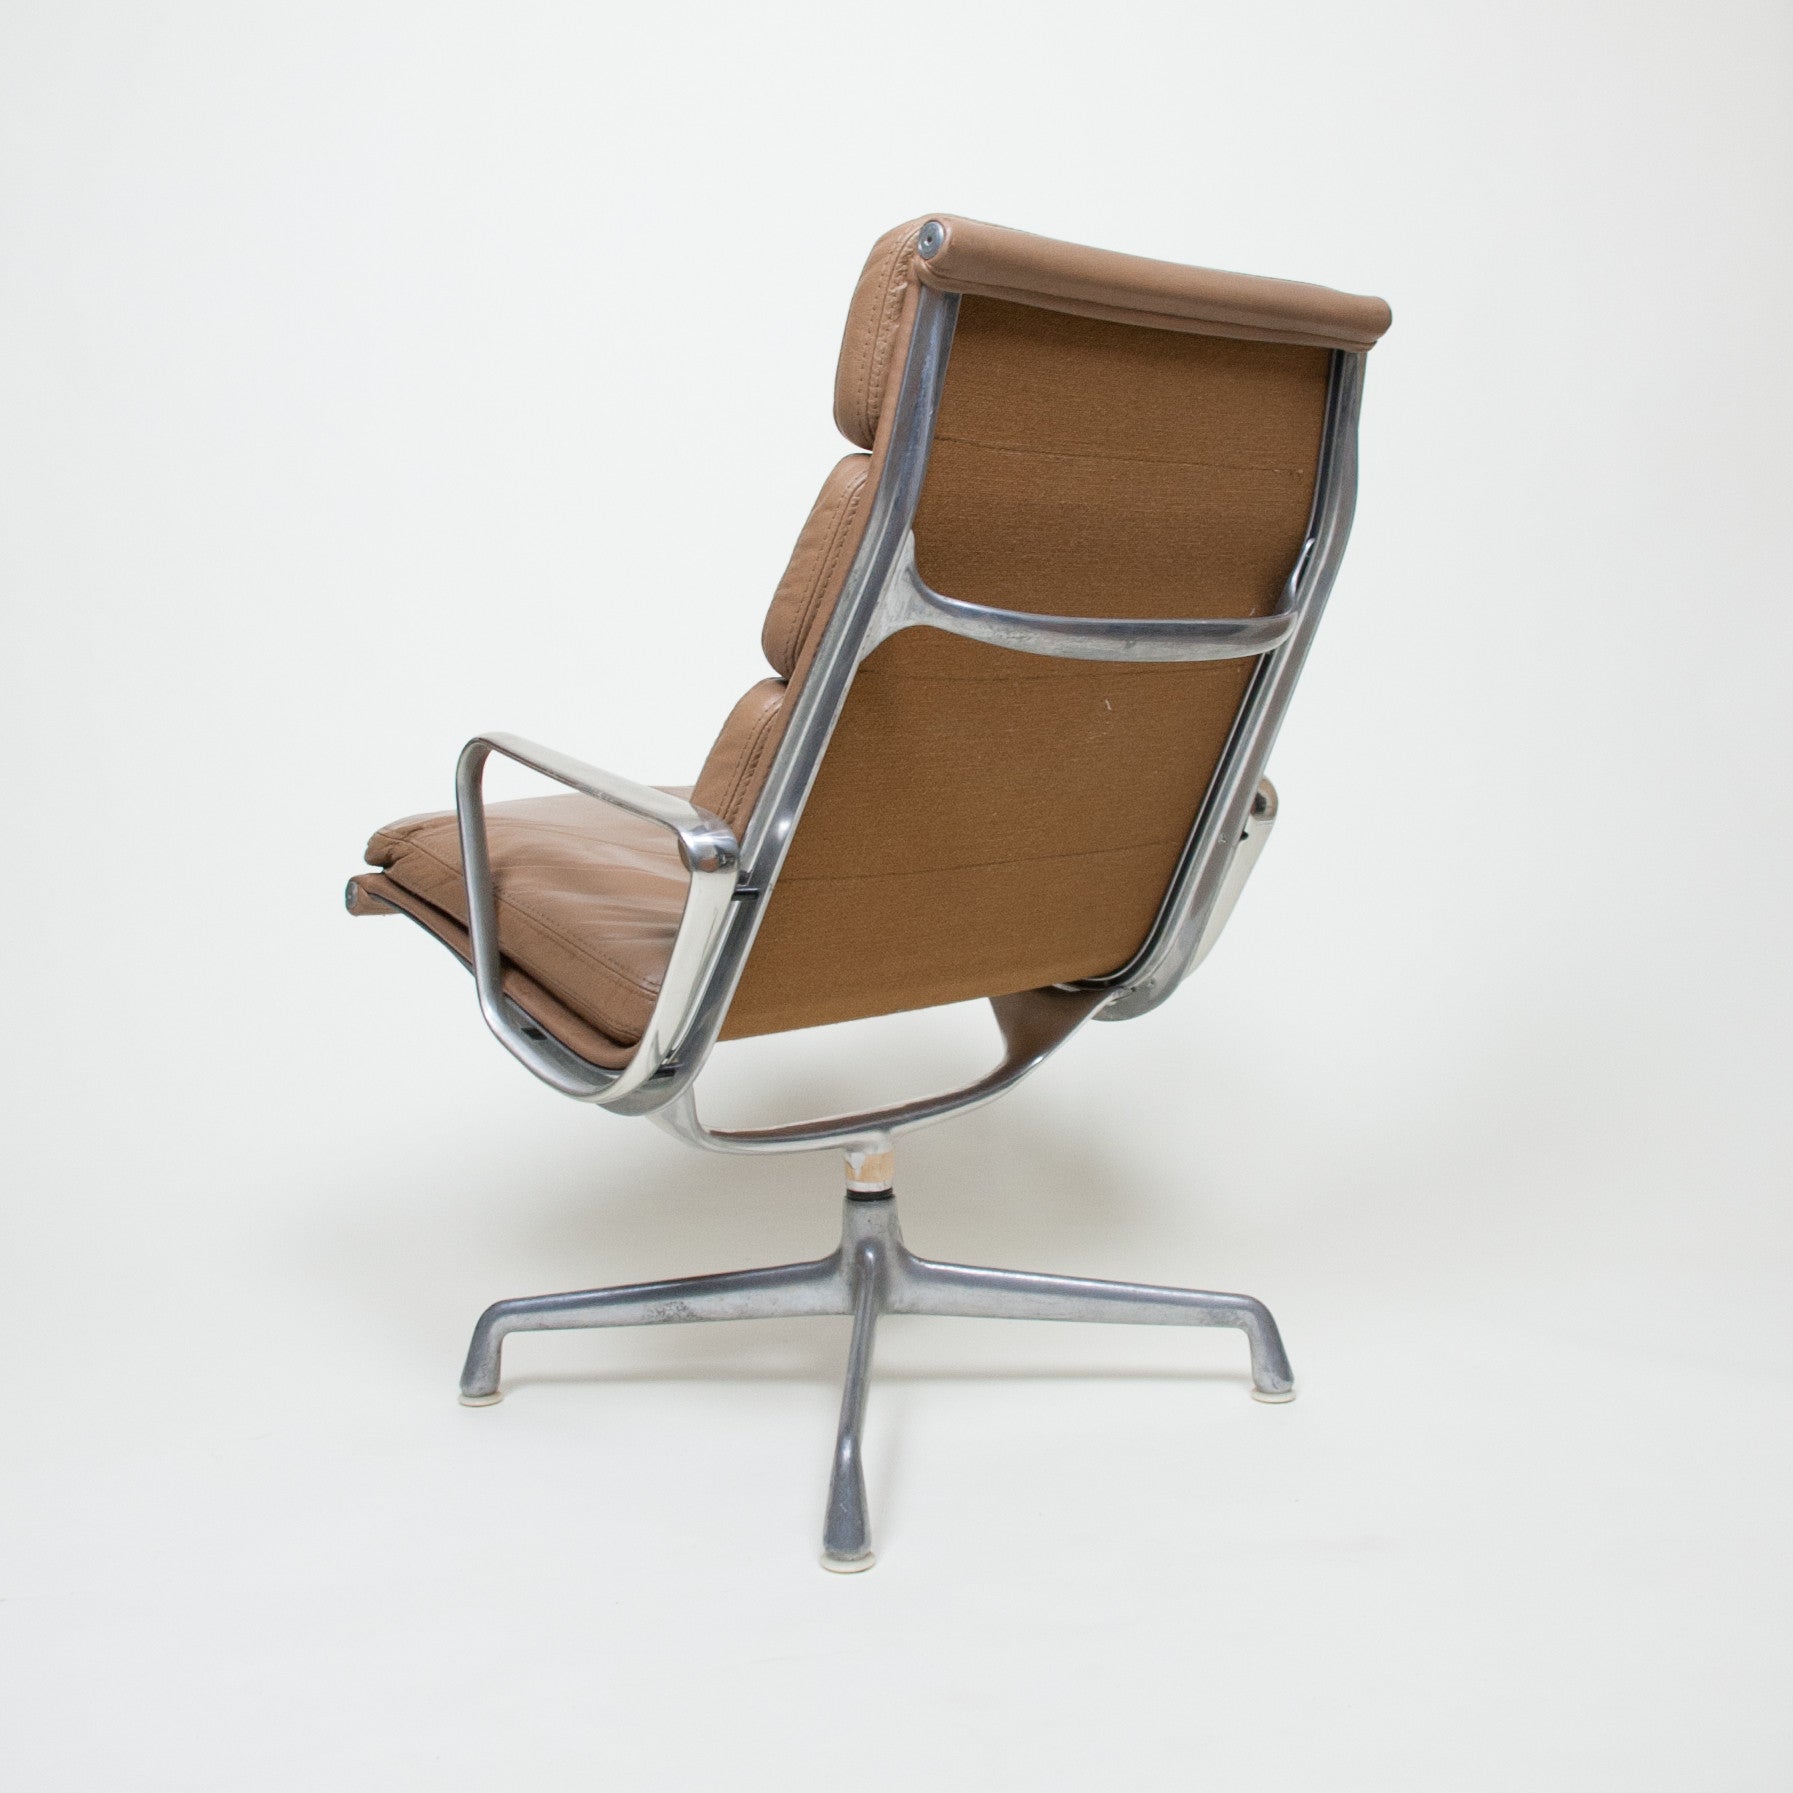 SOLD Eames Herman Miller Soft Pad Lounge Chair Tan Leather